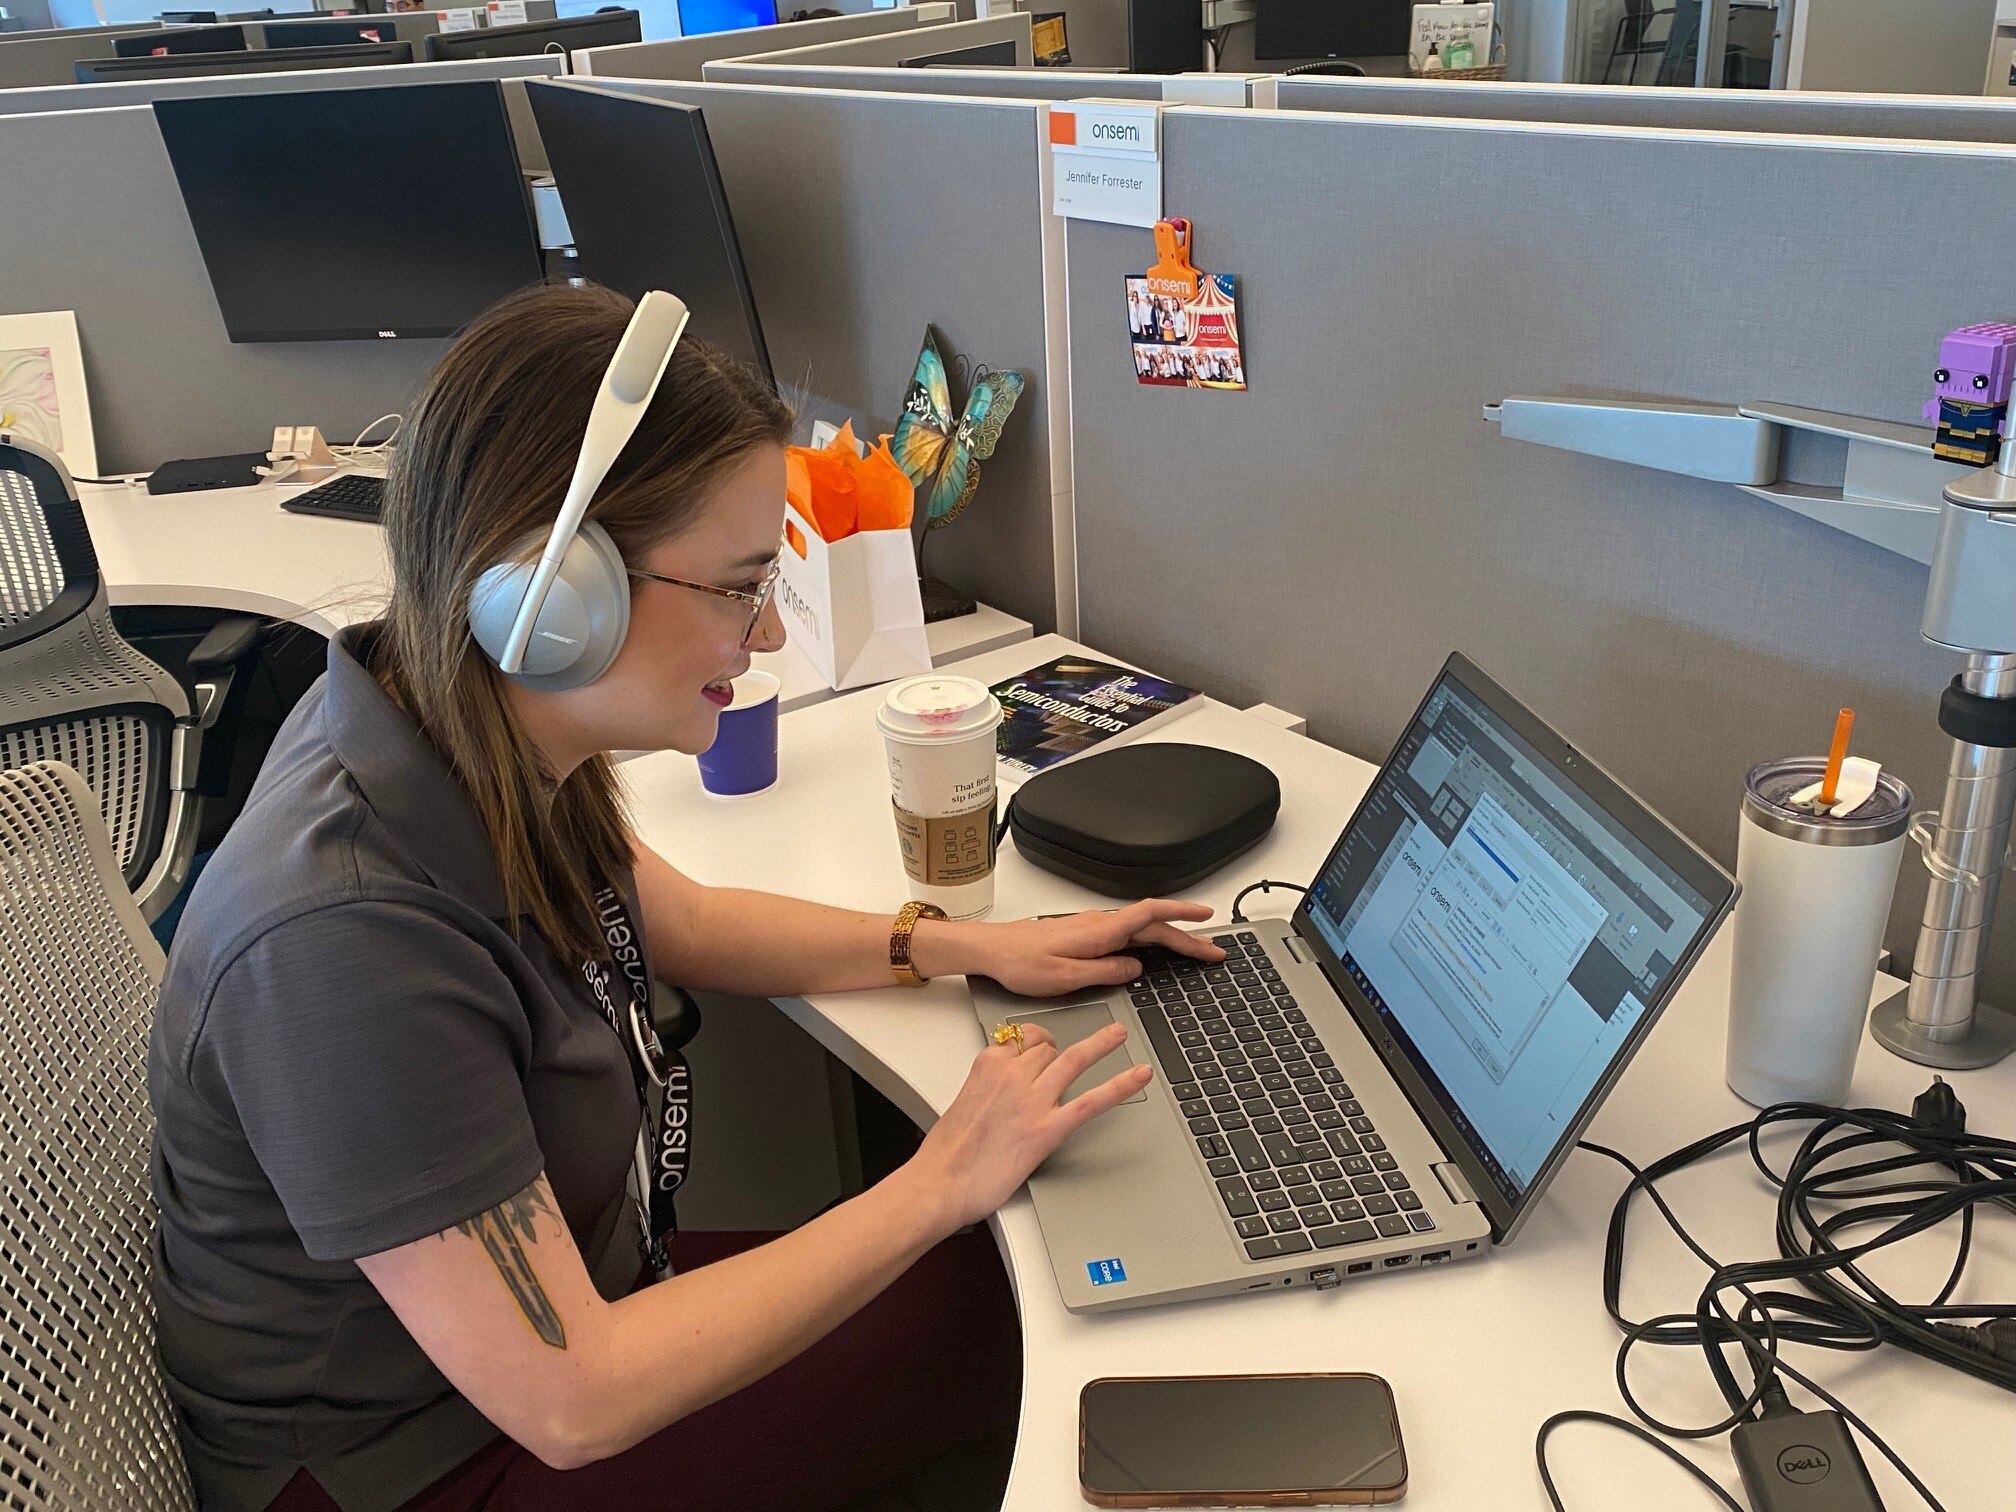 Jennifer uses headphones at work to help with sensory issues